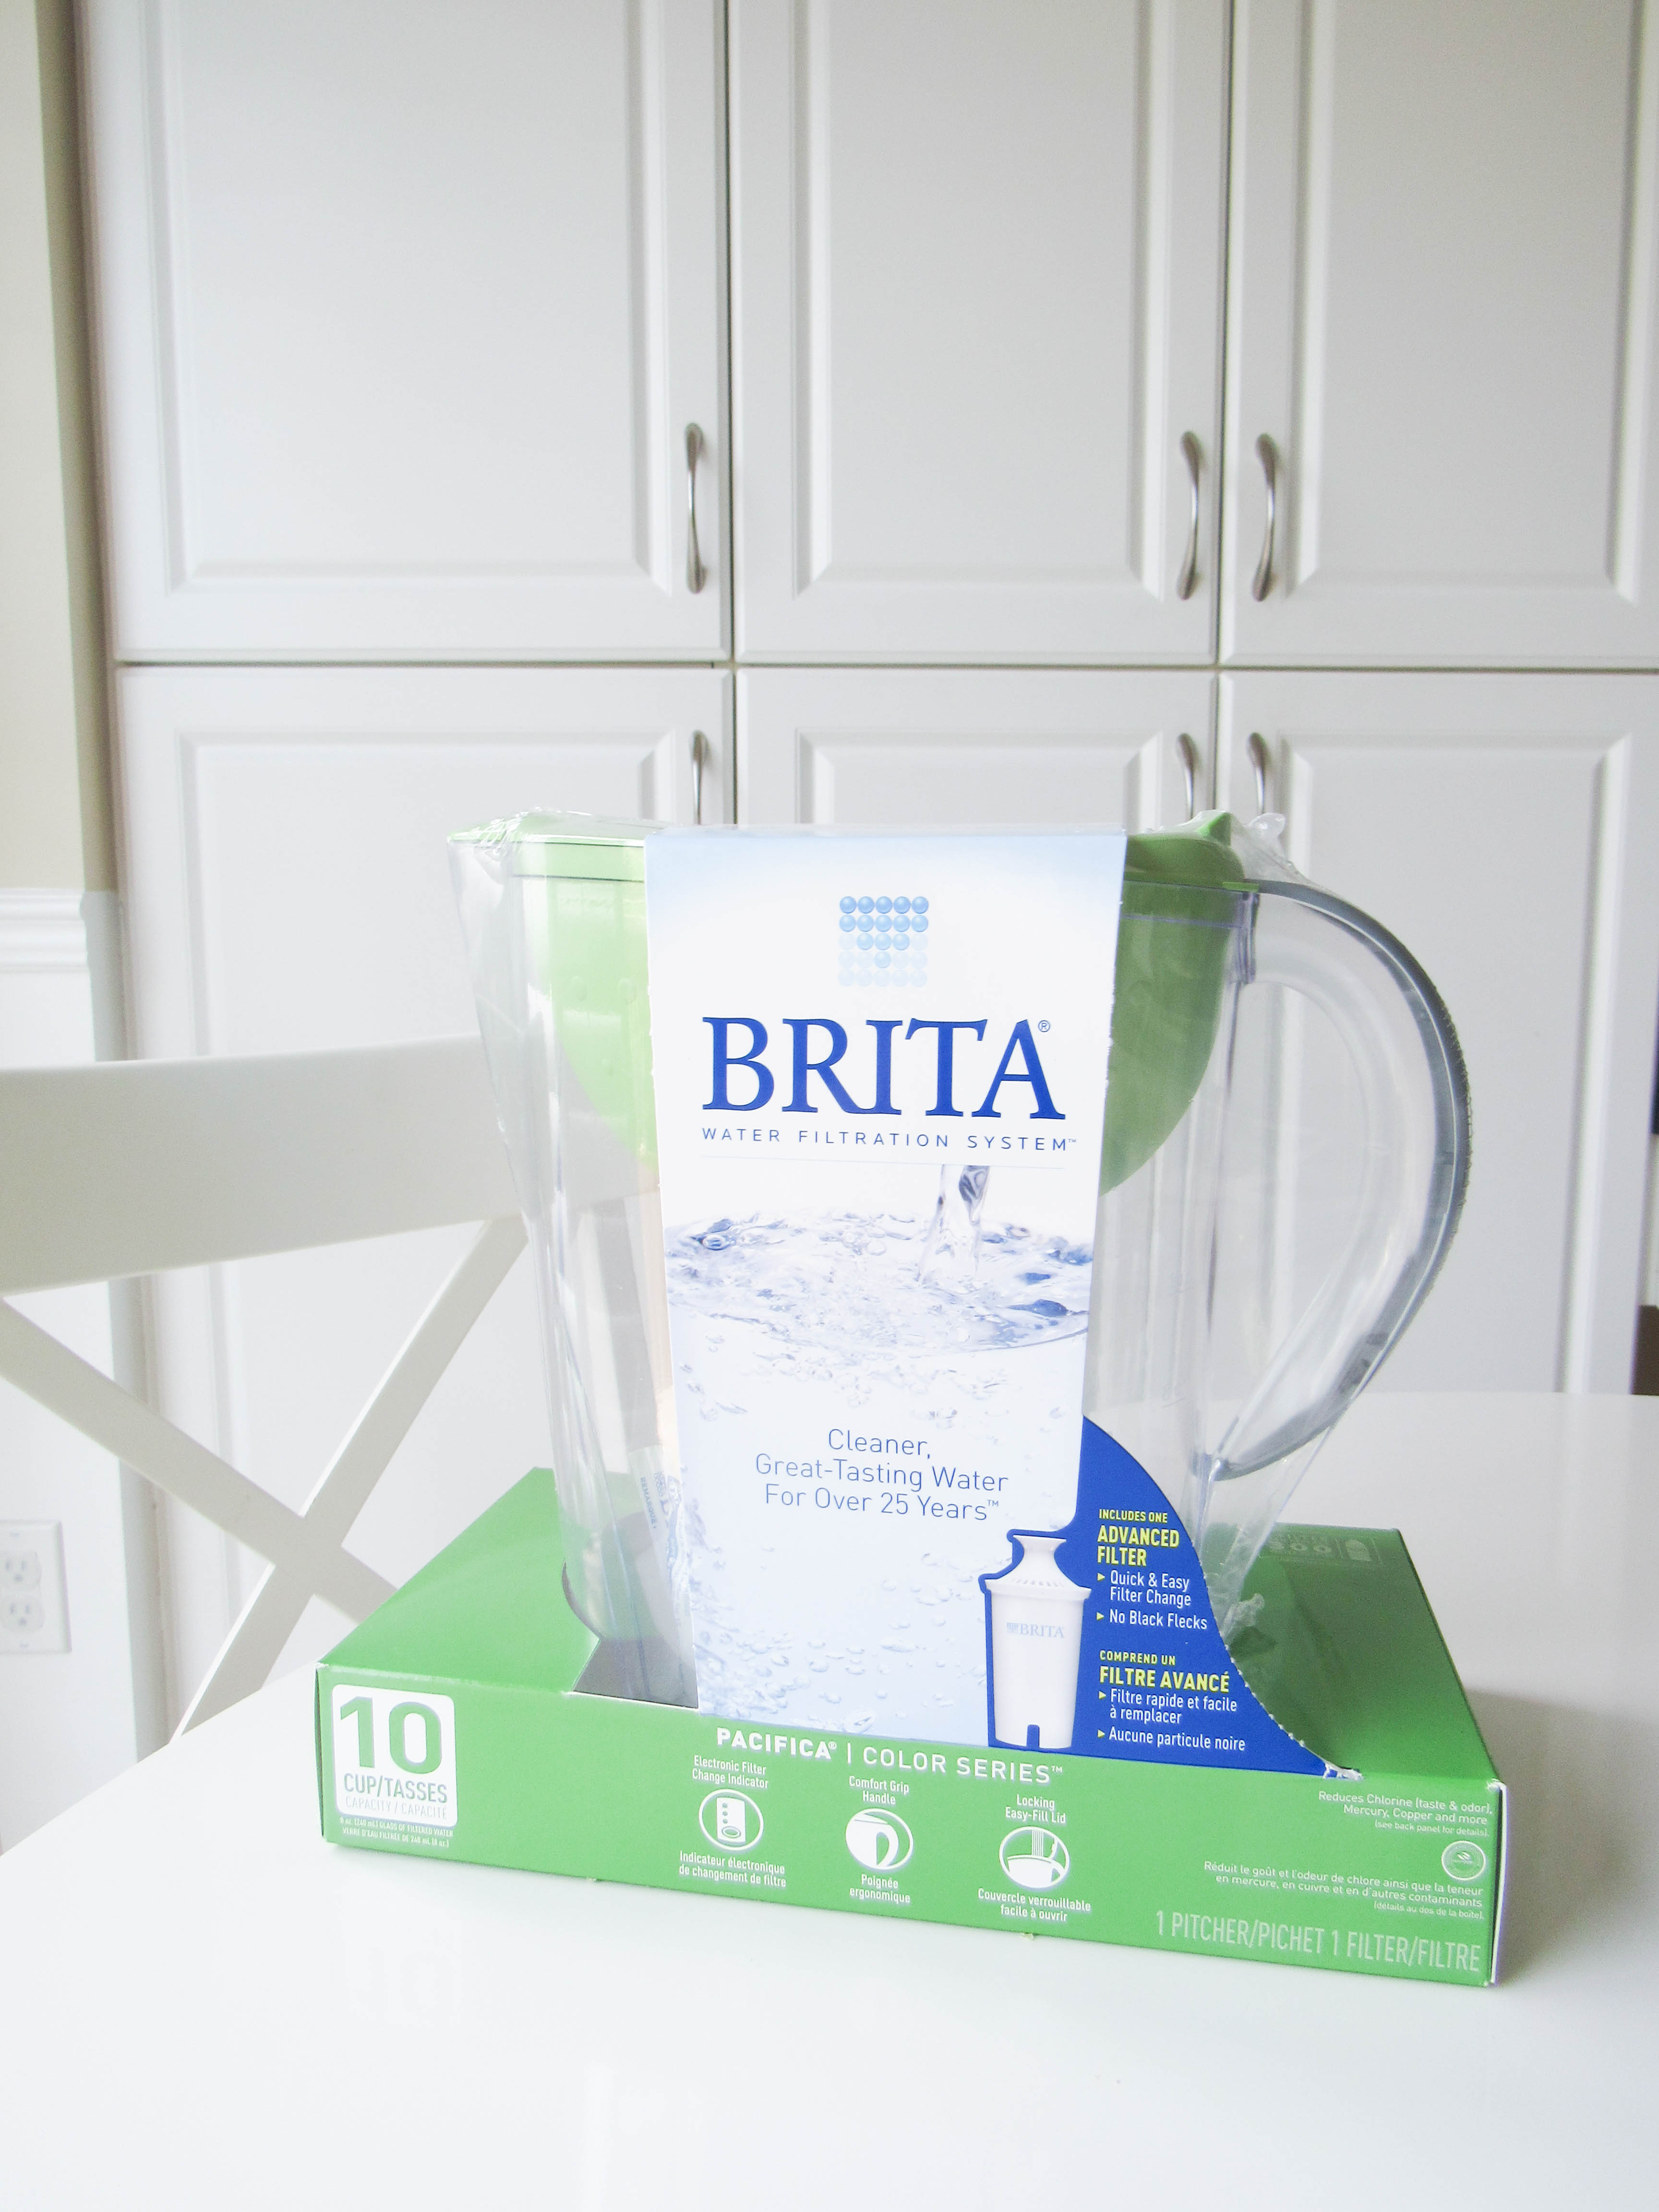 Brita water- livin' life with style